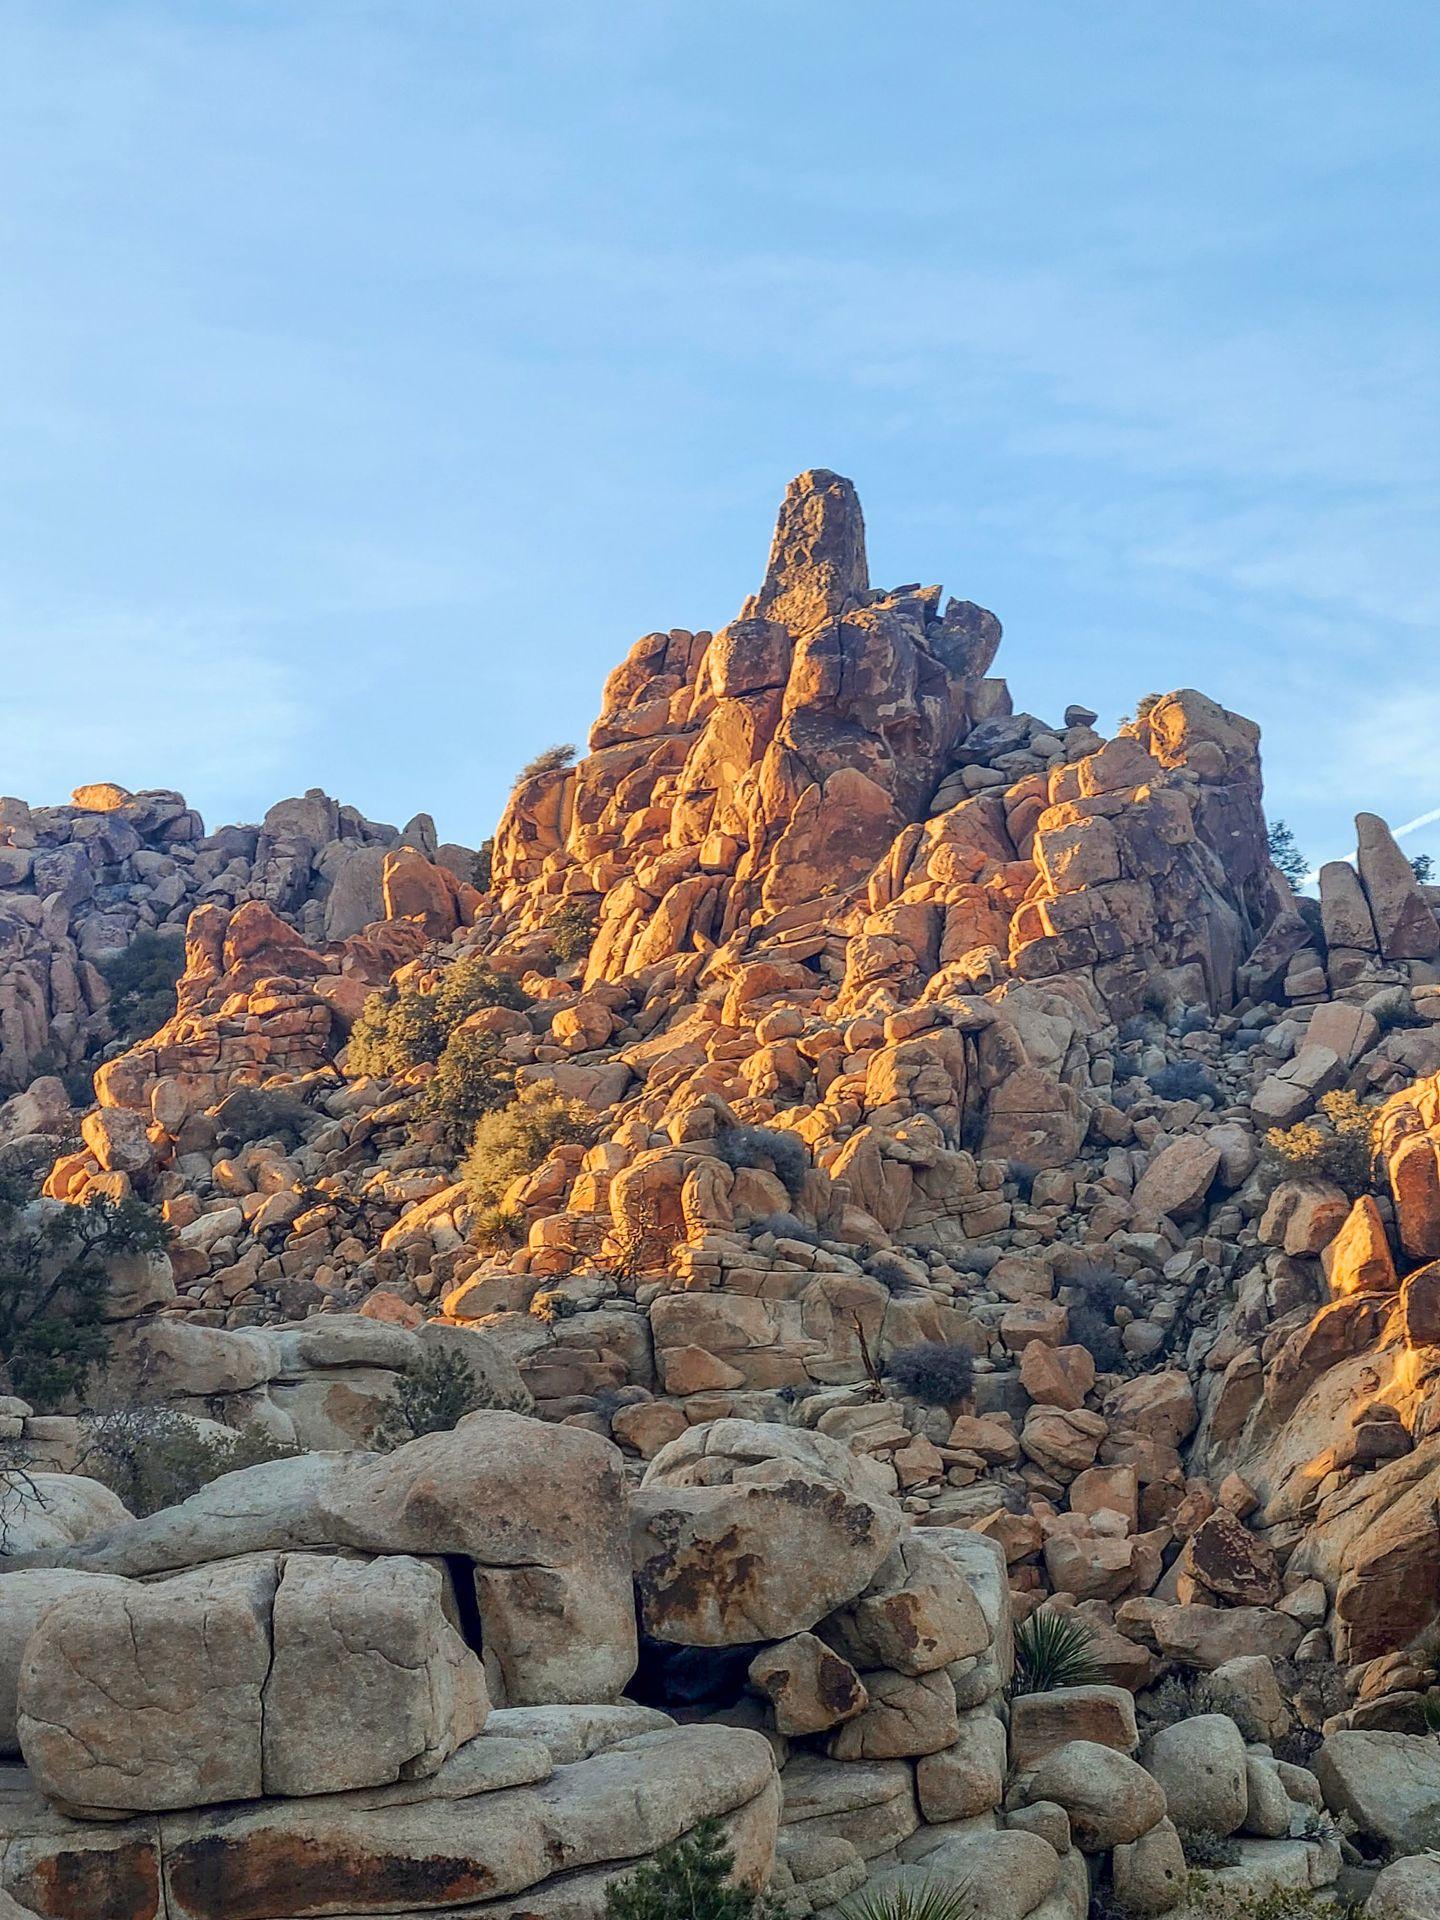 A pile of interesting rocks glowing orange at golden hour on the Hidden Valley Trail.